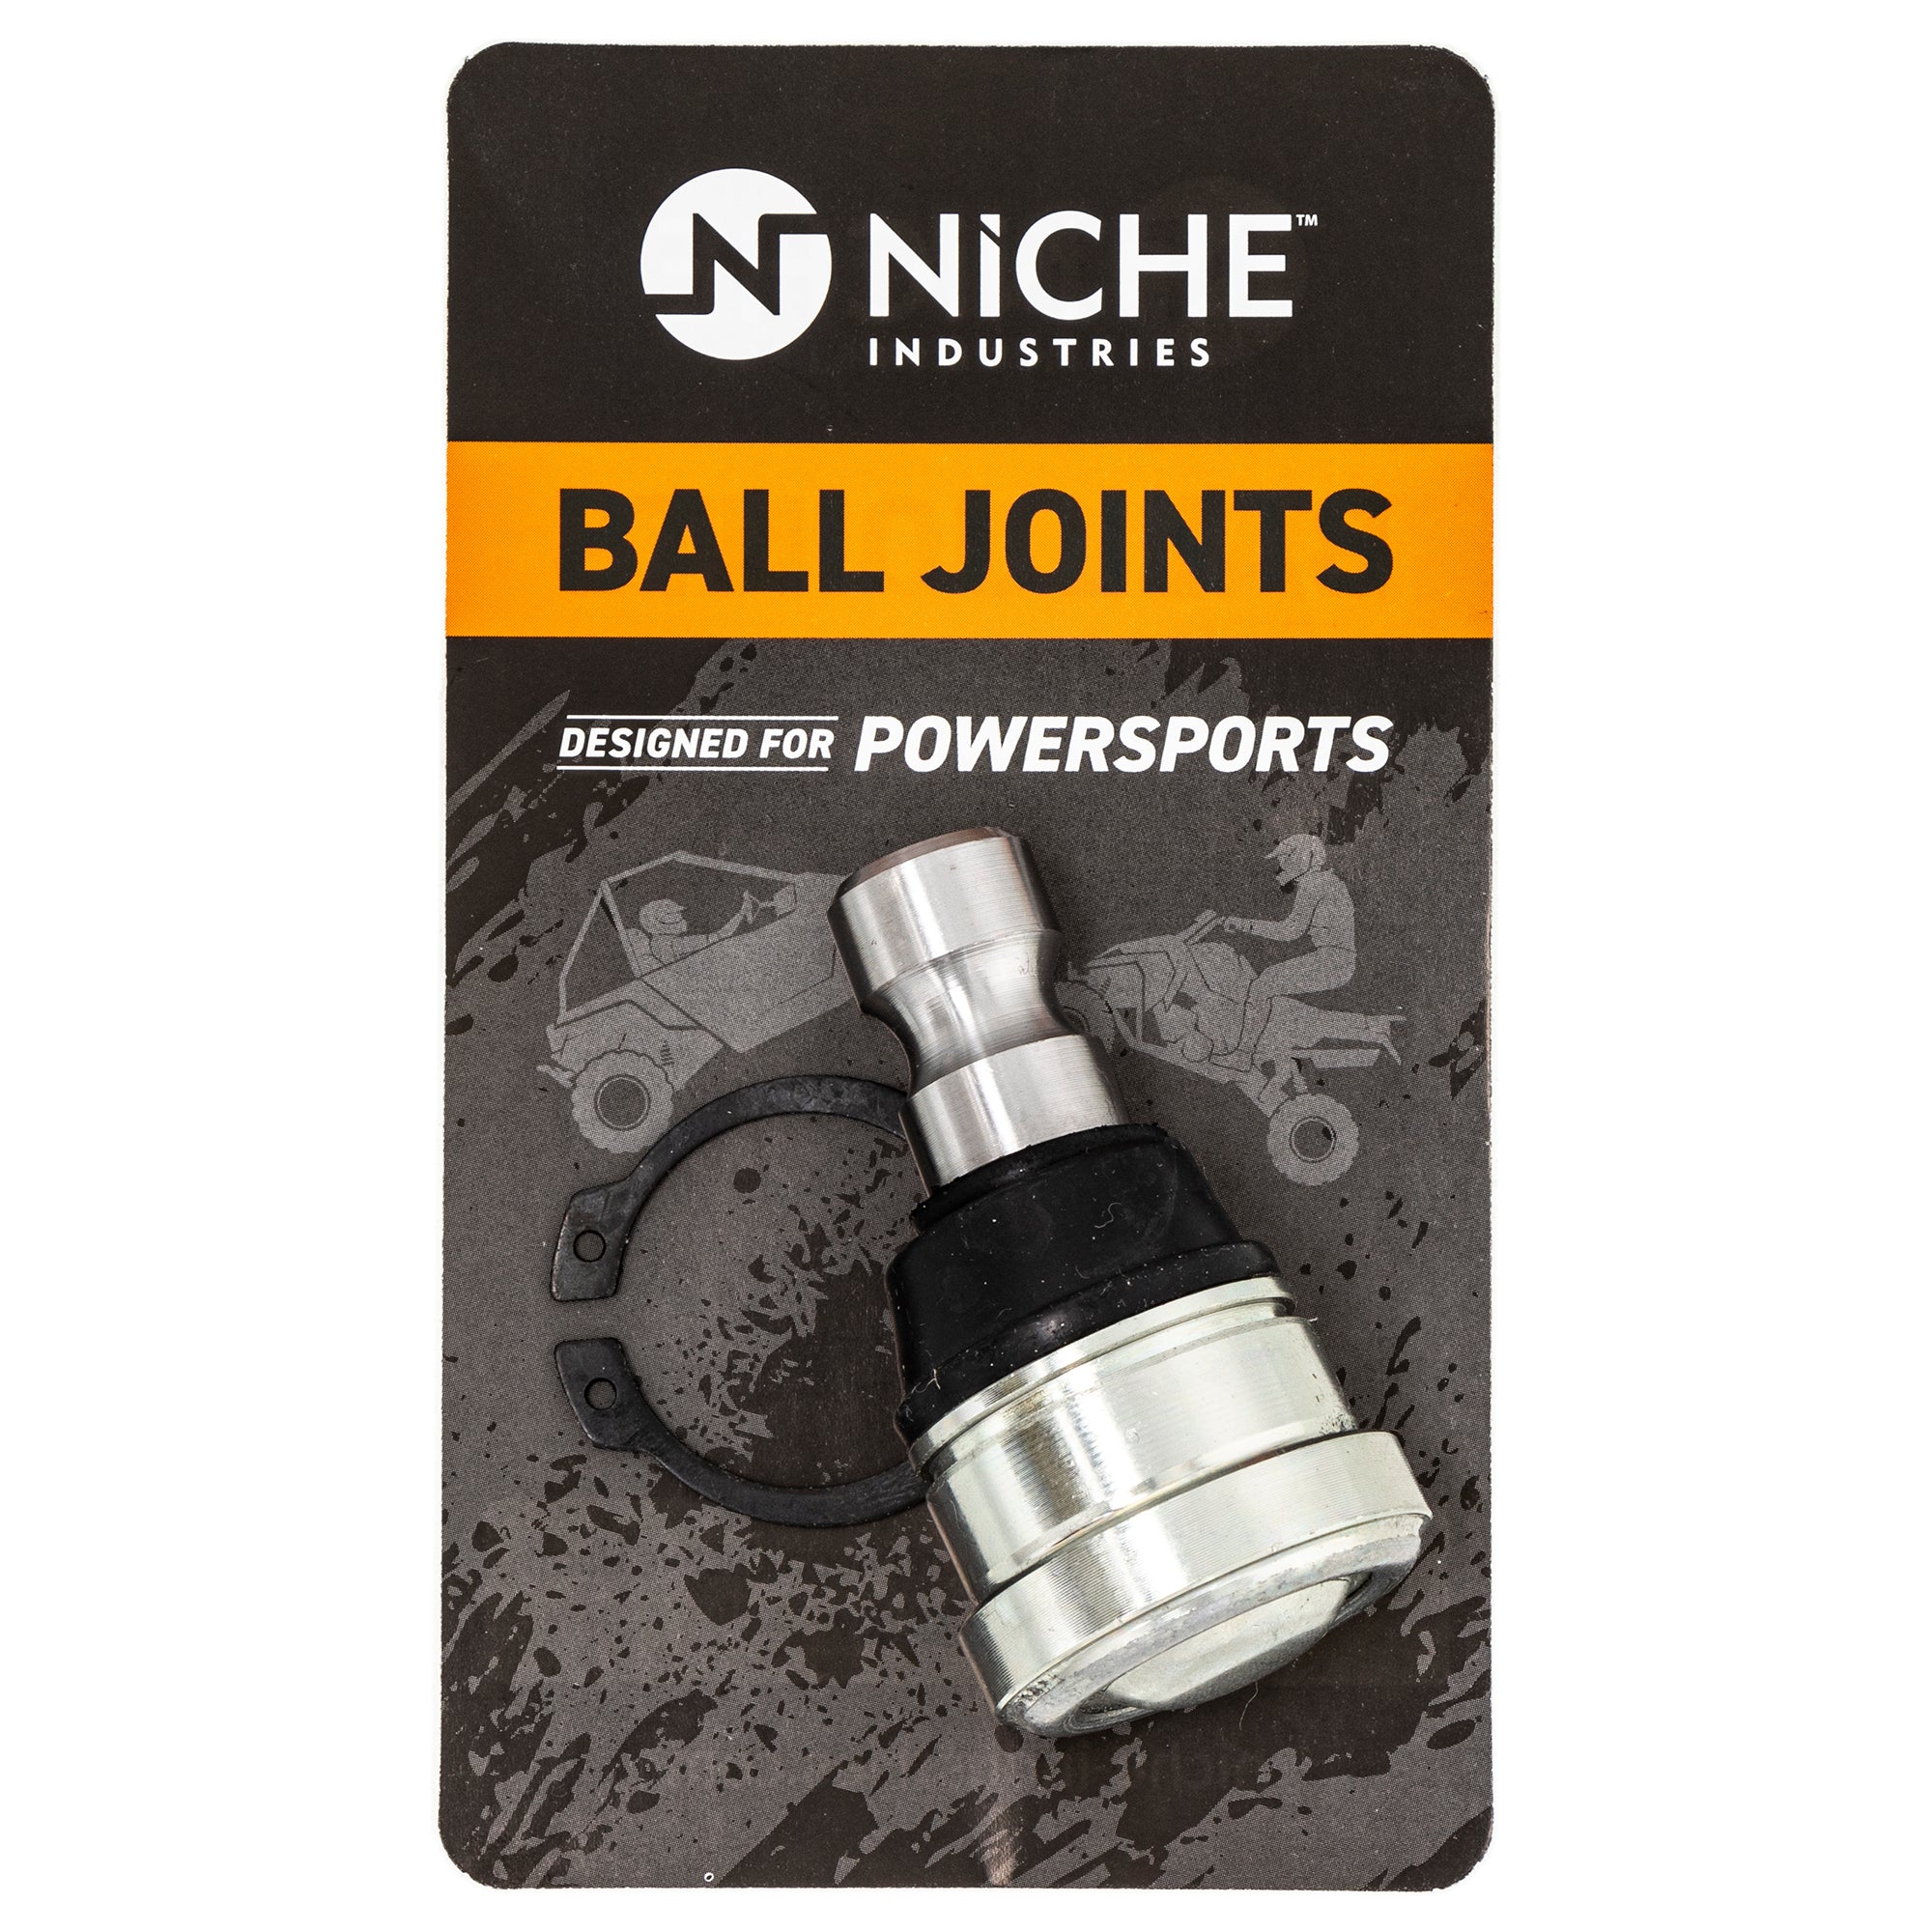 NICHE 519-CBJ2243T Ball Joint 4-Pack for Western Power Sports Polaris